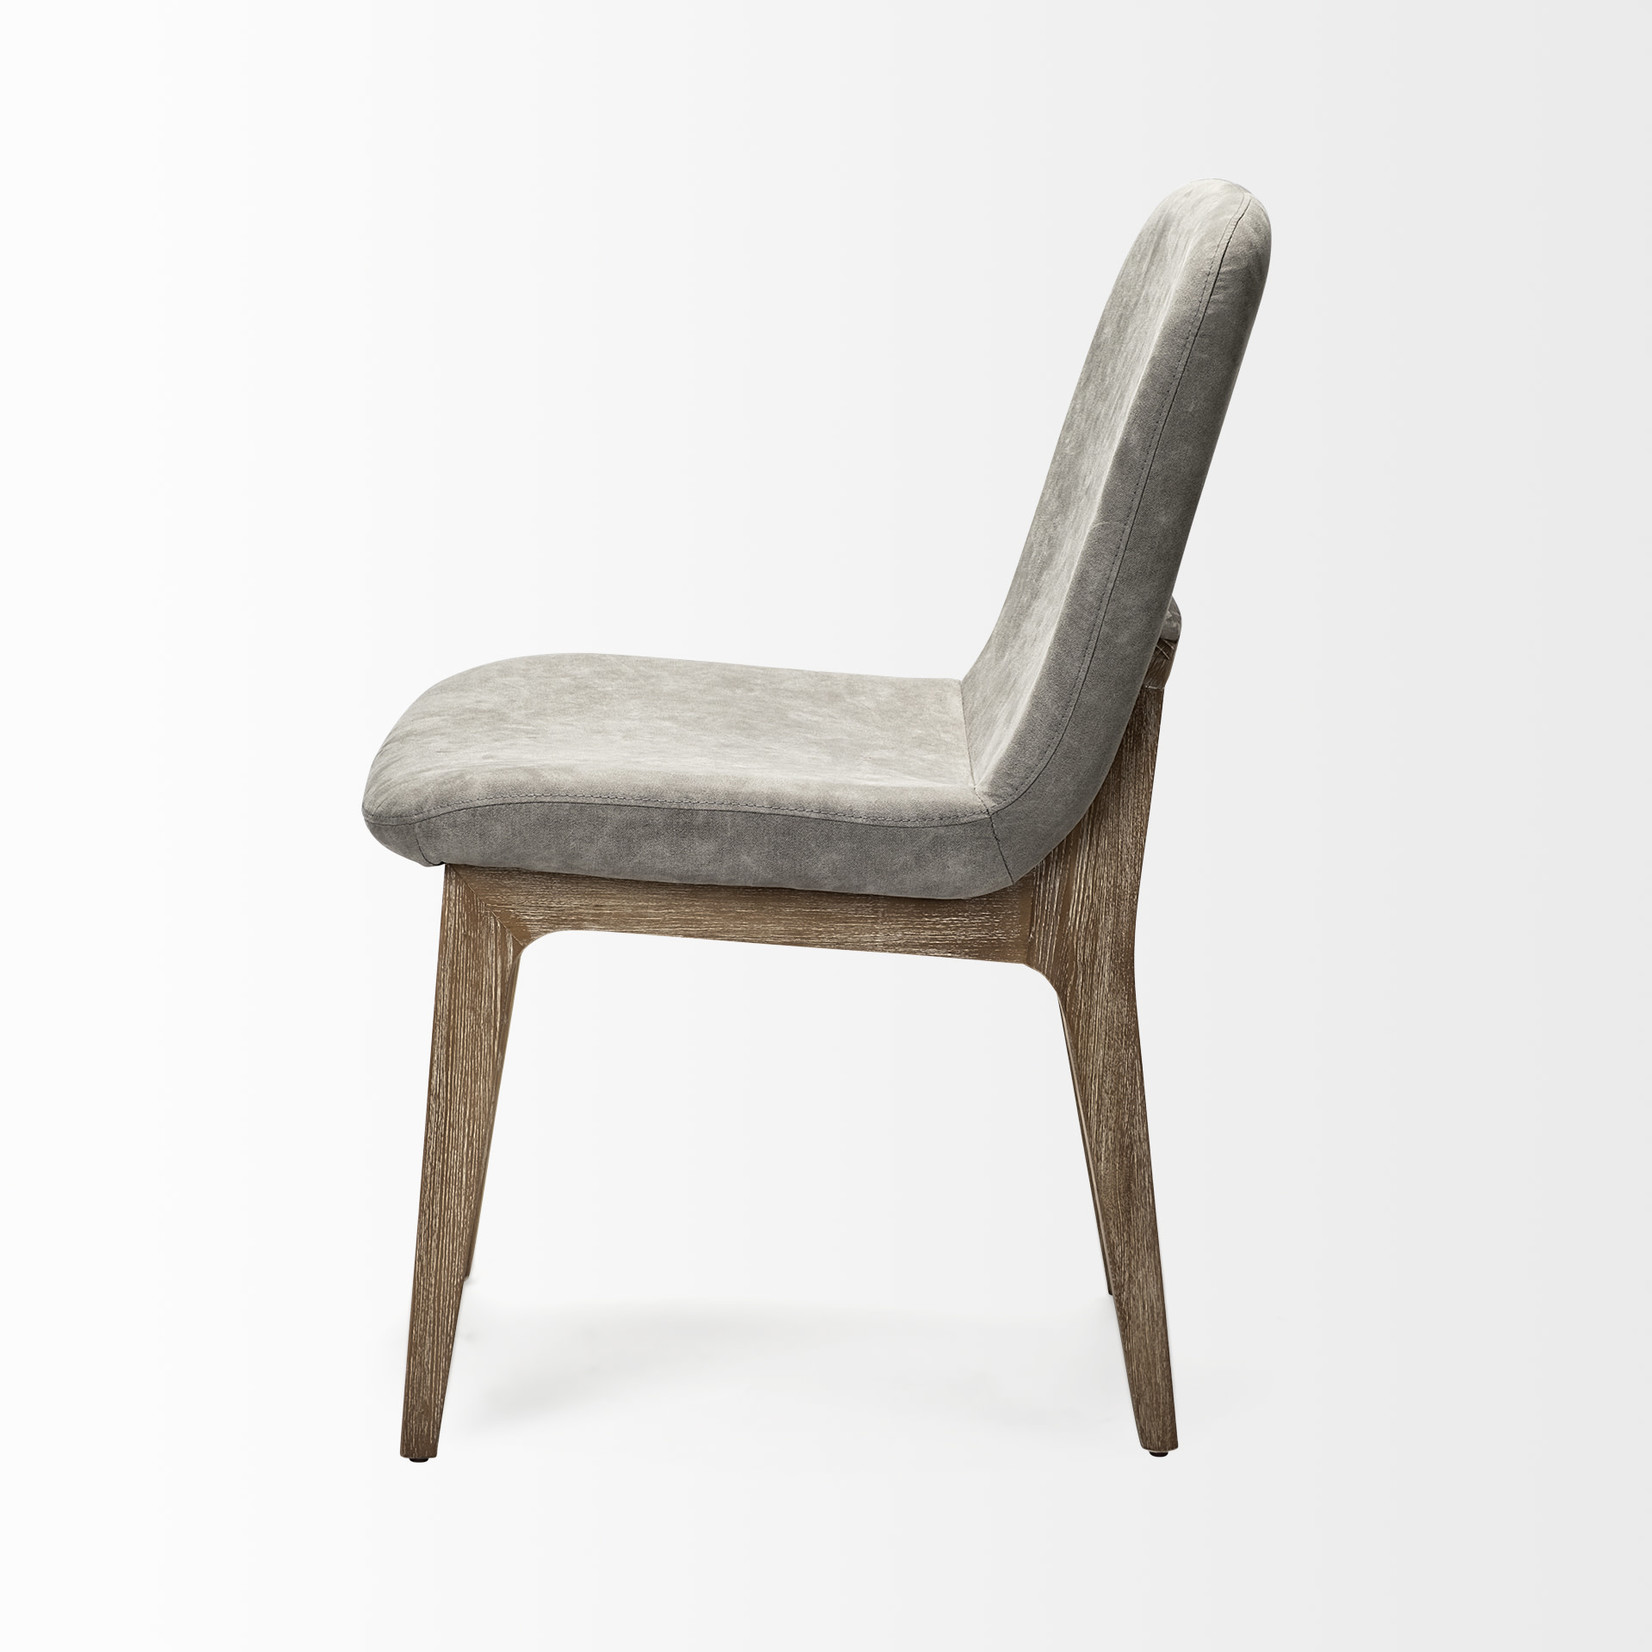 Mickler & Co. Davey Dining Chair